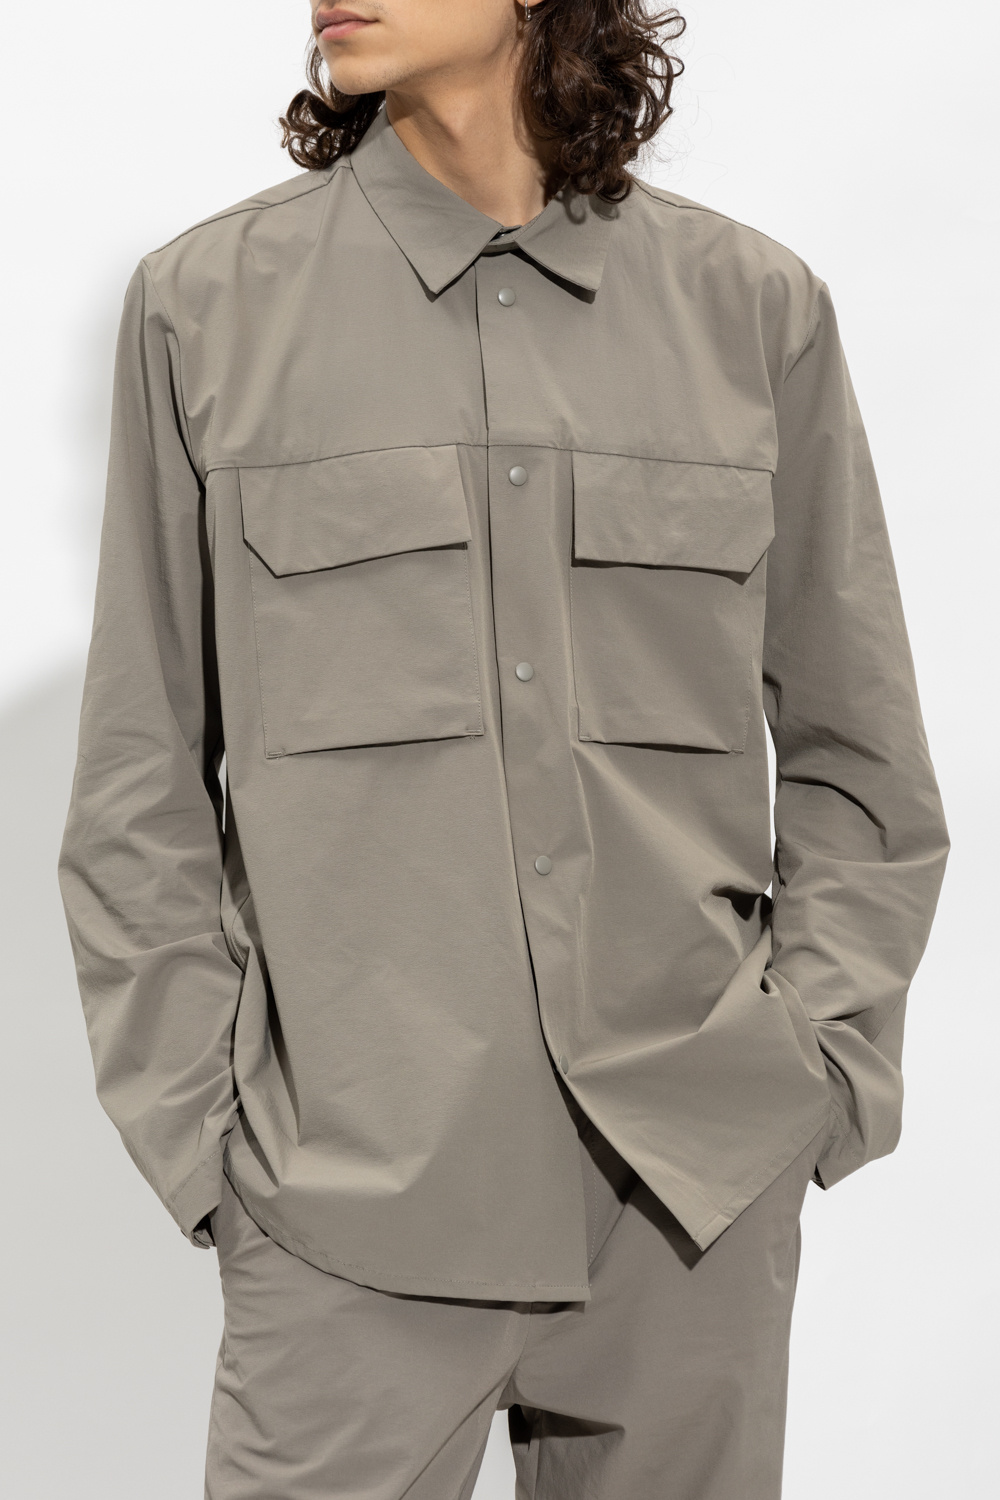 Norse Projects ‘Jens’ shirt